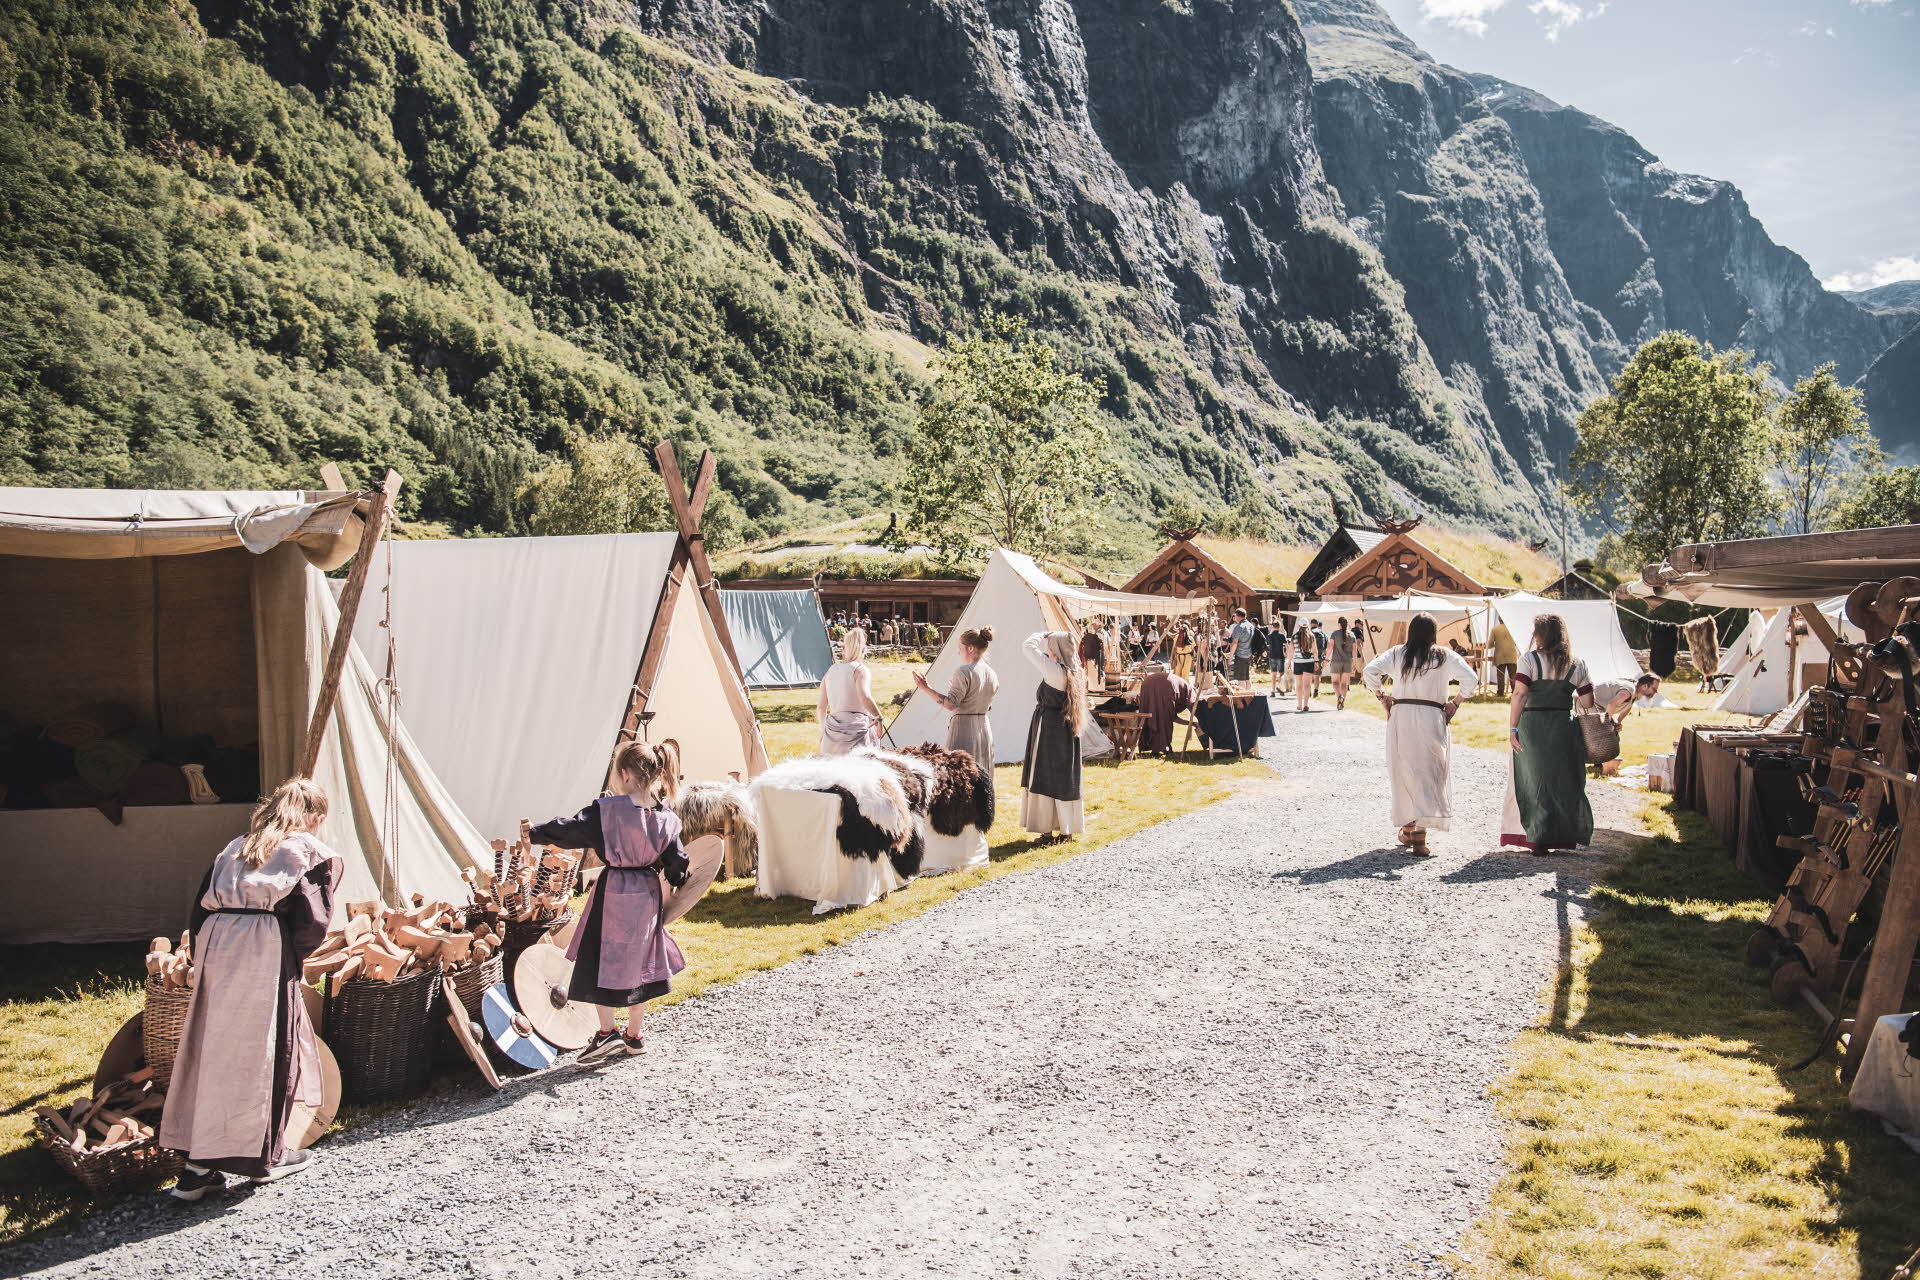 People dressed in Viking clothes outside tents in Gudvangen, showing hand-made products